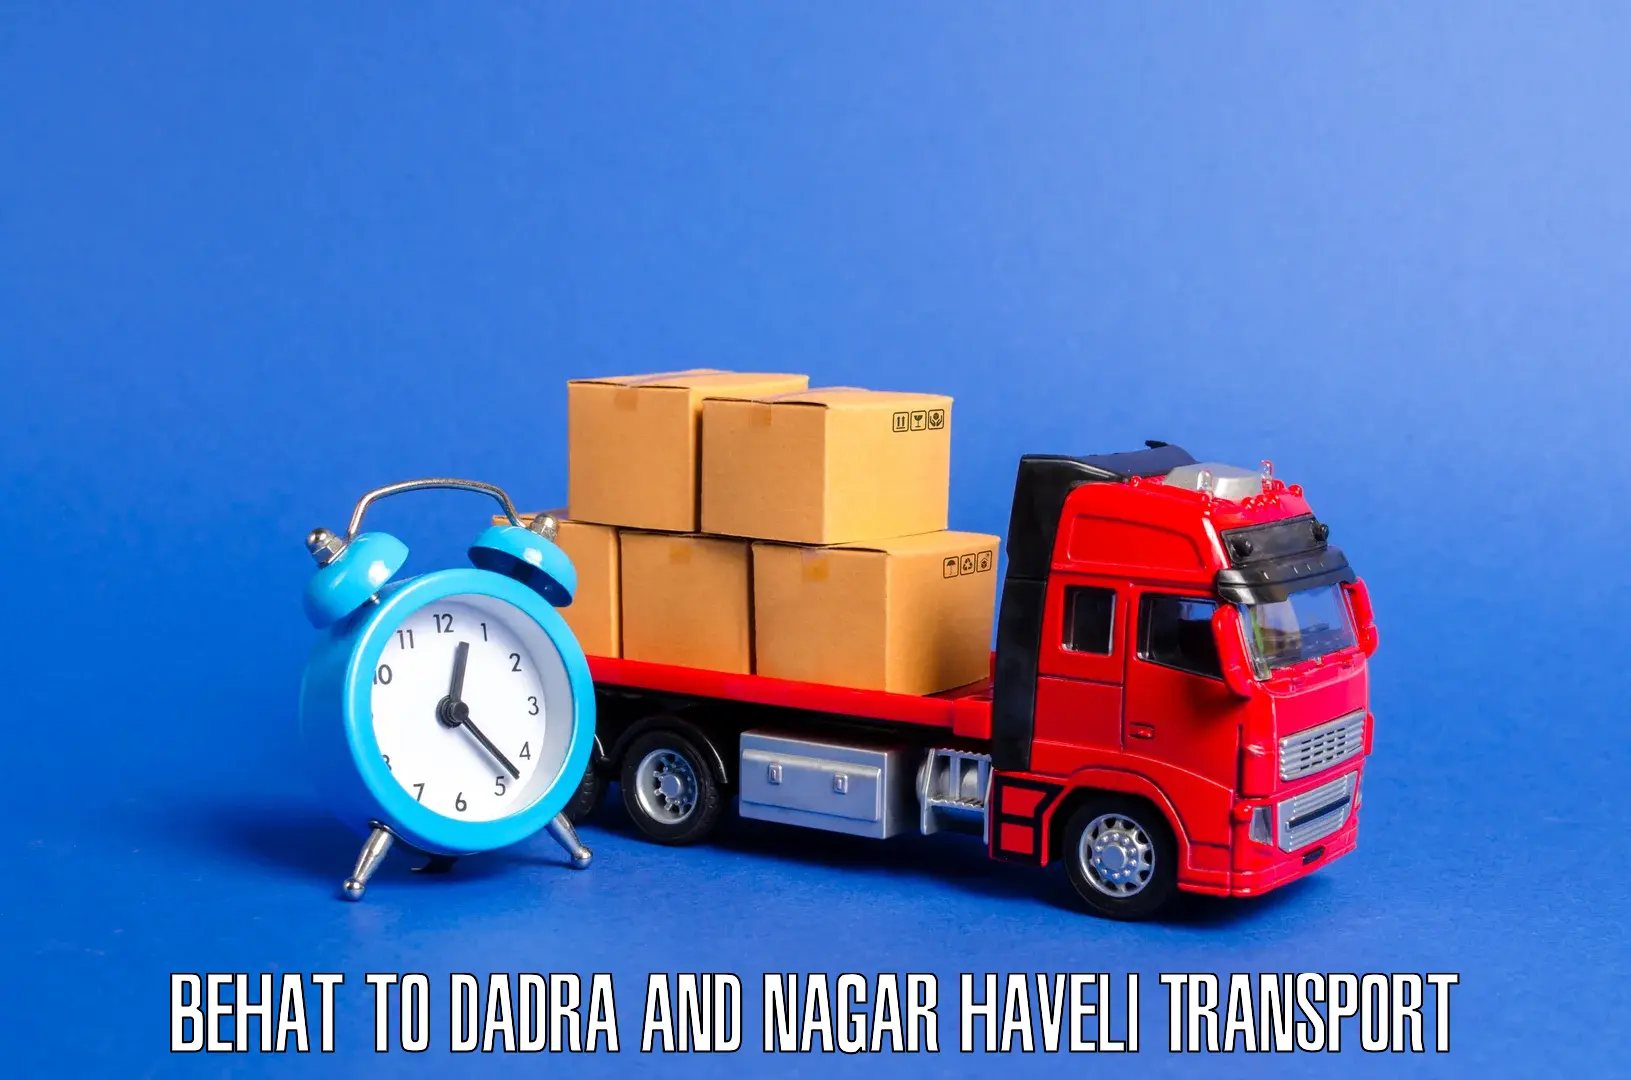 Transport shared services Behat to Dadra and Nagar Haveli